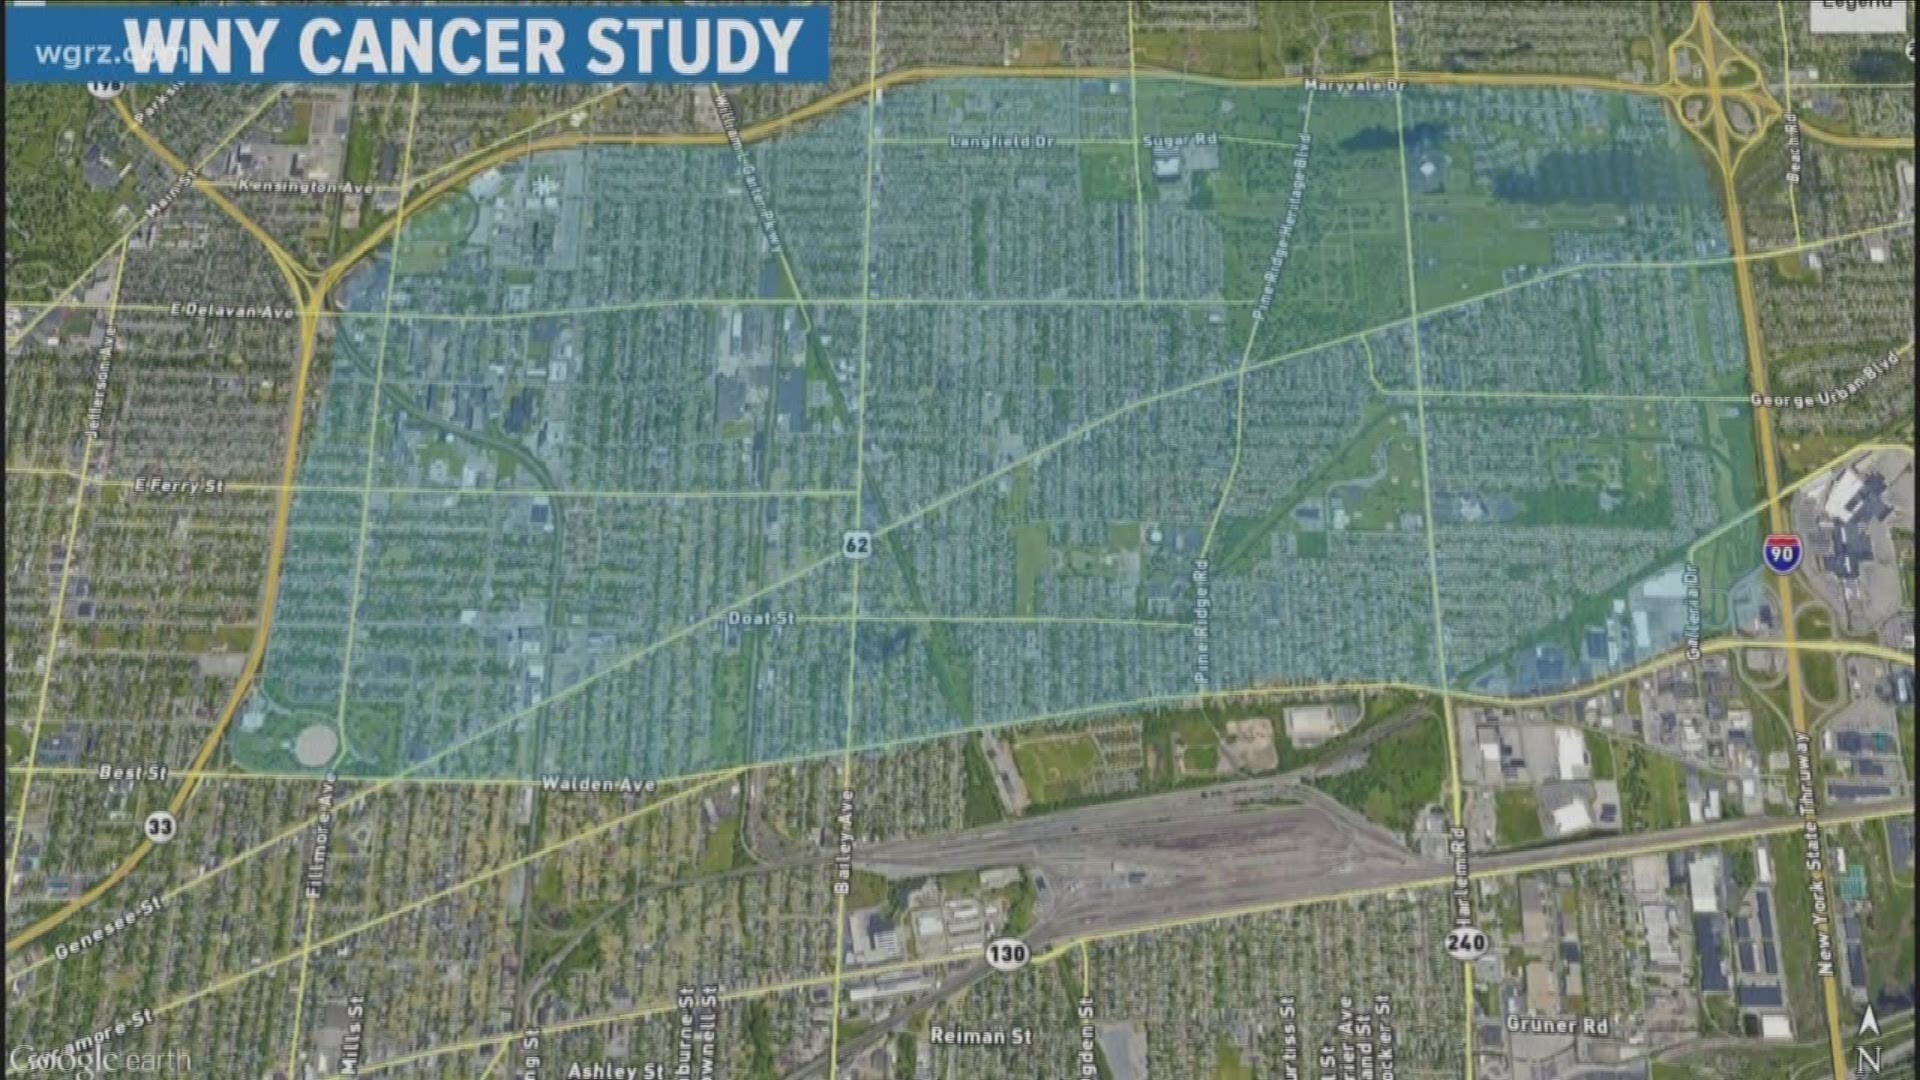 Why Are Rates Of Some Cancers Higher IN WNY?